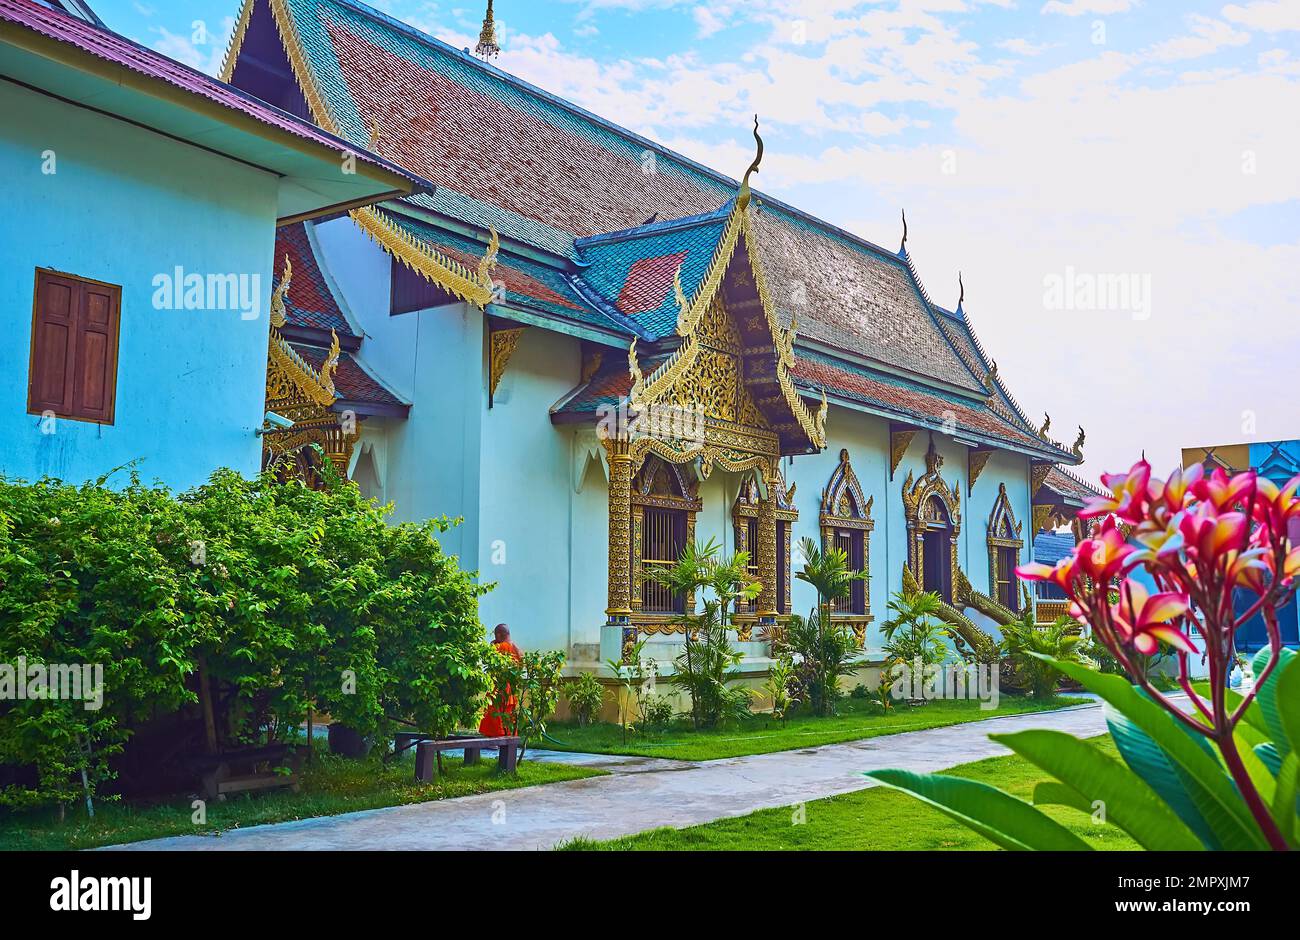 Ornate side wall of the viharn of Wat Chiang Man temple, surrounded with garden beds, Chiang Mai, Thailand Stock Photo